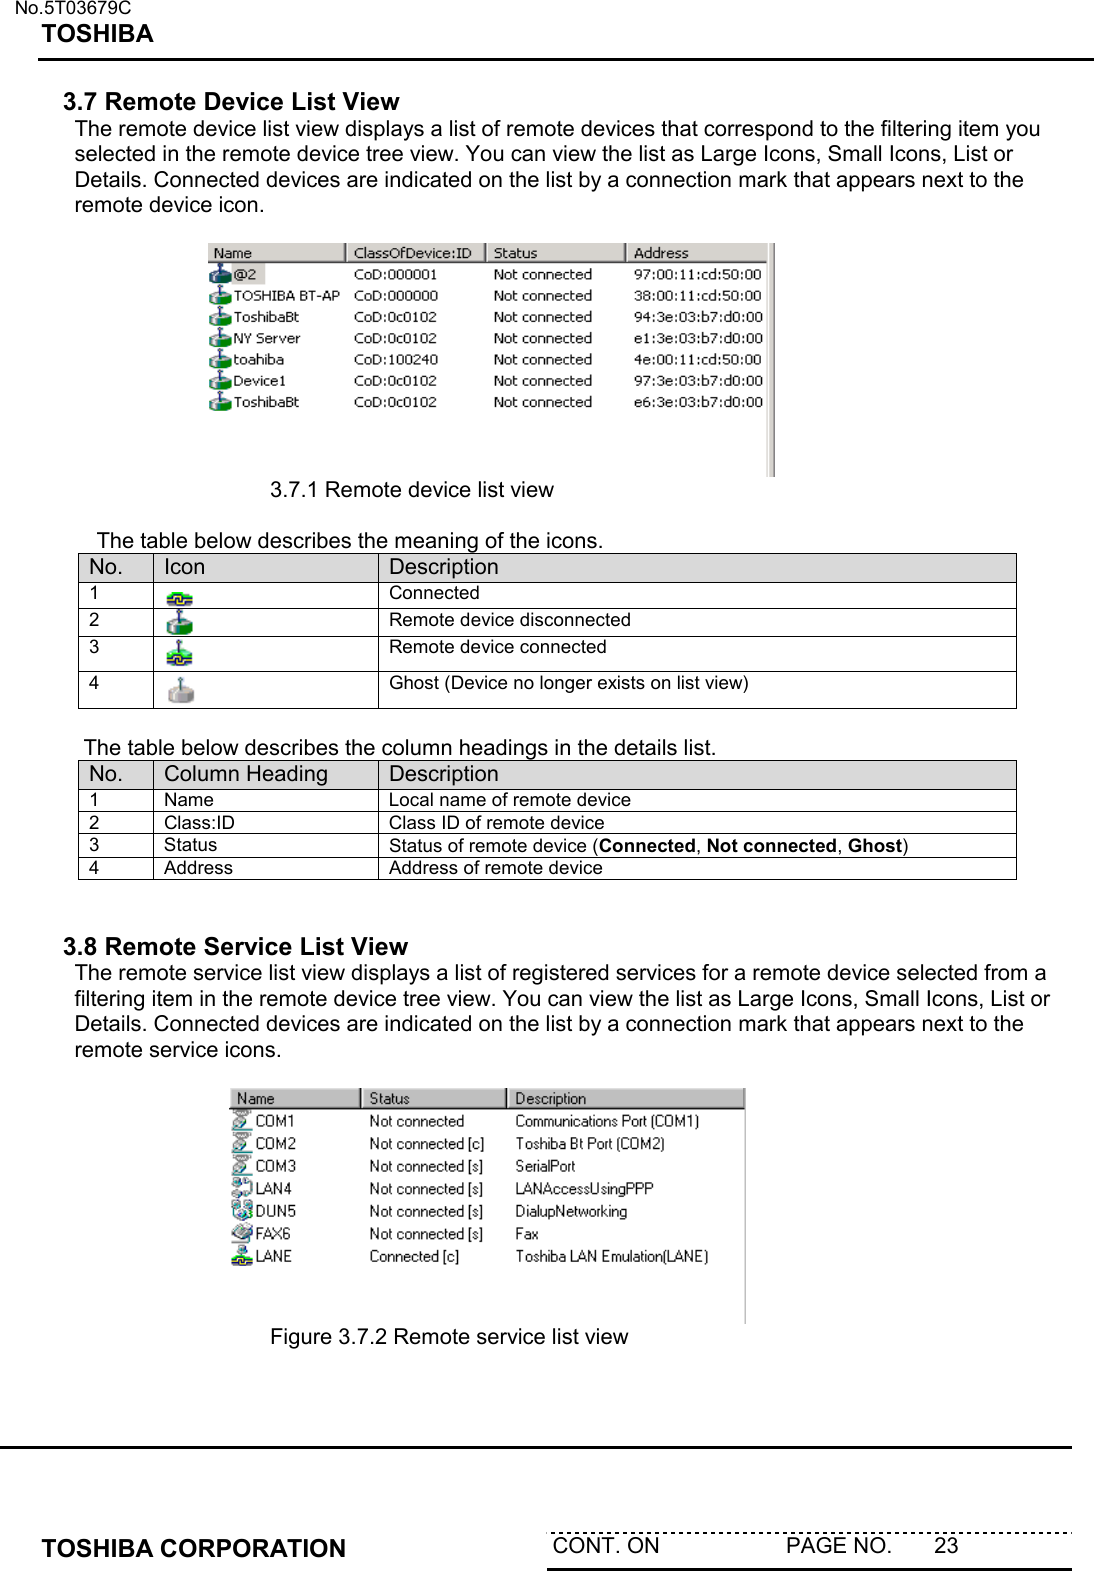   No.5T03679C TOSHIBA   TOSHIBA CORPORATION  CONT. ON                     PAGE NO.       23   3.7 Remote Device List View The remote device list view displays a list of remote devices that correspond to the filtering item you selected in the remote device tree view. You can view the list as Large Icons, Small Icons, List or Details. Connected devices are indicated on the list by a connection mark that appears next to the remote device icon.         3.7.1 Remote device list view   The table below describes the meaning of the icons. No.  Icon  Description 1   Connected 2   Remote device disconnected 3   Remote device connected 4   Ghost (Device no longer exists on list view)  The table below describes the column headings in the details list. No.  Column Heading  Description 1  Name  Local name of remote device 2  Class:ID  Class ID of remote device 3 Status  Status of remote device (Connected, Not connected, Ghost) 4  Address  Address of remote device   3.8 Remote Service List View The remote service list view displays a list of registered services for a remote device selected from a filtering item in the remote device tree view. You can view the list as Large Icons, Small Icons, List or Details. Connected devices are indicated on the list by a connection mark that appears next to the remote service icons.         Figure 3.7.2 Remote service list view   